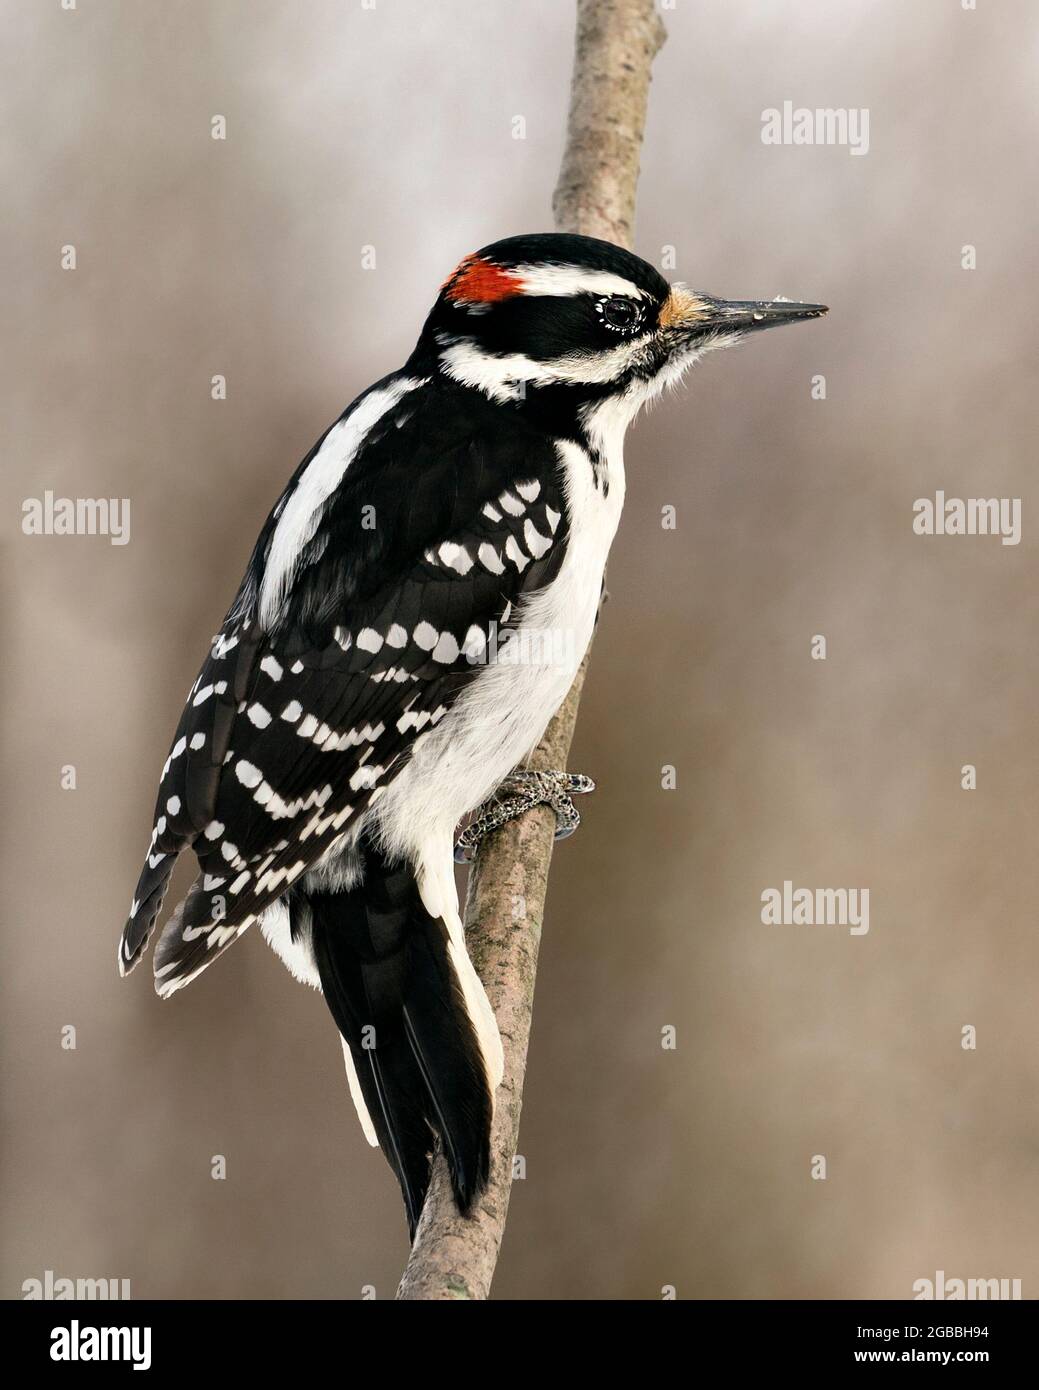 Woodpecker close-up profile view perched on a tree branch with blur background in its environment and habitat. Image. Picture. Portrait. Stock Photo